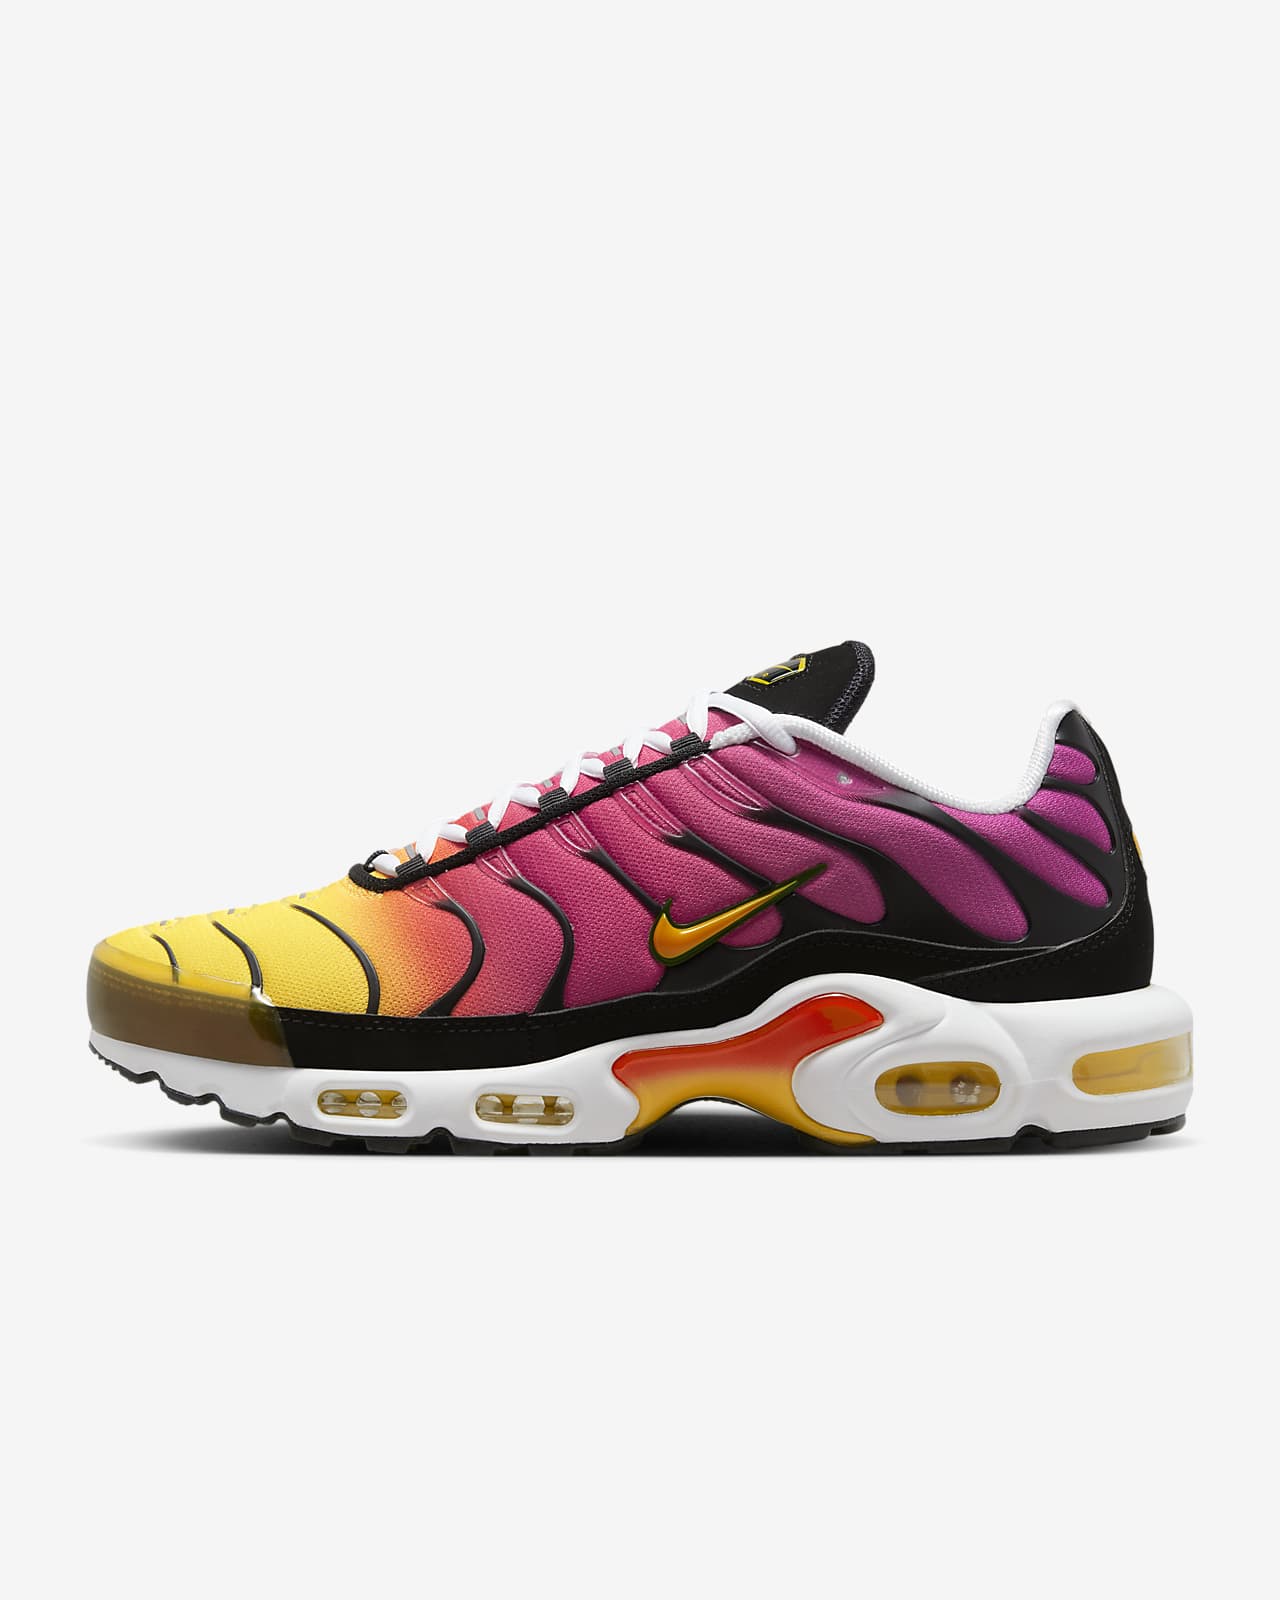 Chaussure Nike Max Plus pour homme. Nike FR